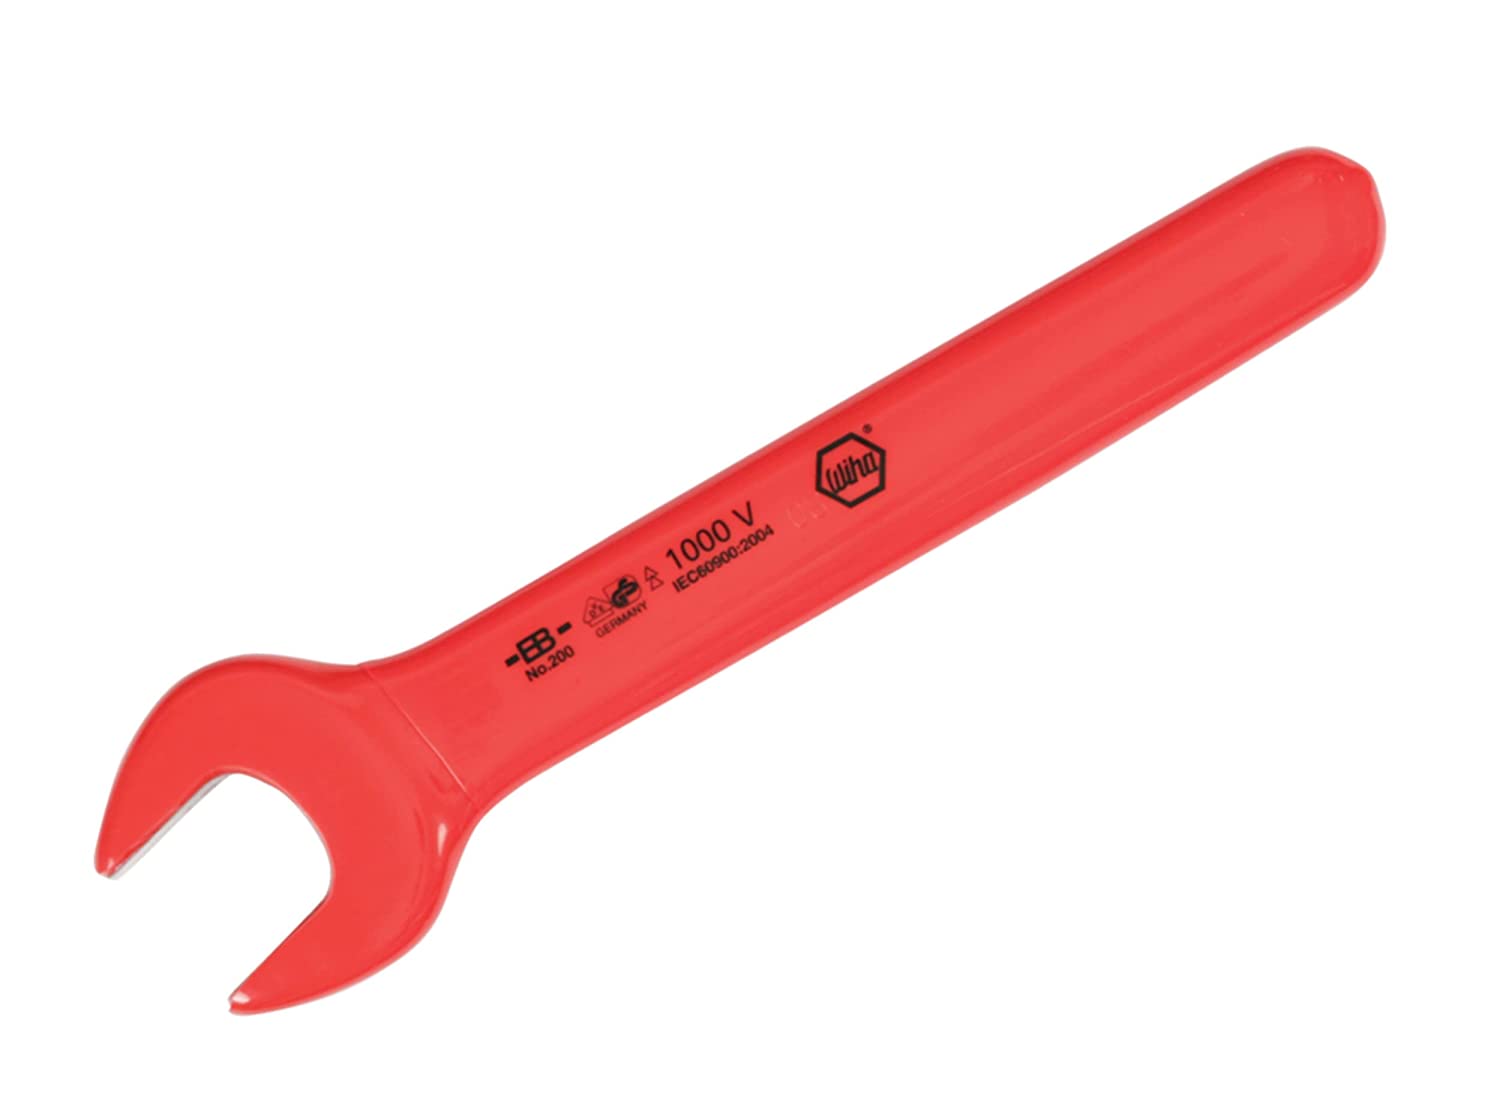 Wiha 20020 Insulated Open End Wrench 20mm by 190mm OAL Angled 15-Degrees Germany